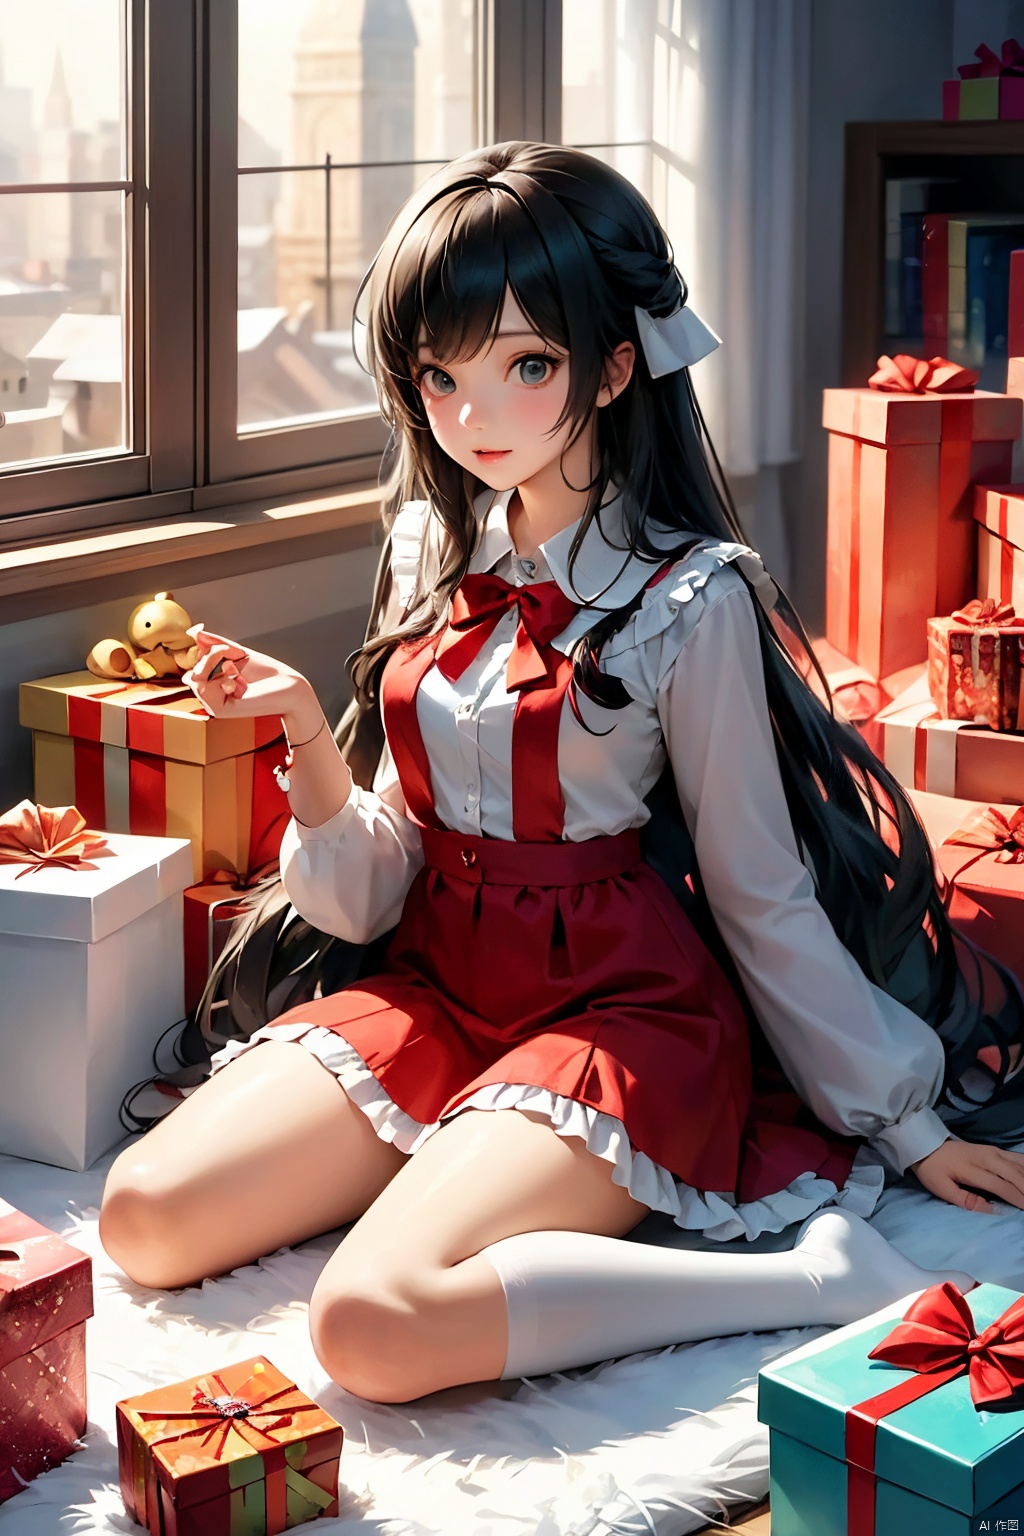 a girl sitting on the floor with presents around her, an anime drawing by Yang J, pixiv contest winner, fantasy art, beautiful anime girl, cute anime girl, cute anime waifu in a nice dress, anime visual of a cute girl, anime girl with long hair, pretty anime girl, attractive anime girl, beautiful anime woman, young anime girl, (anime girl)